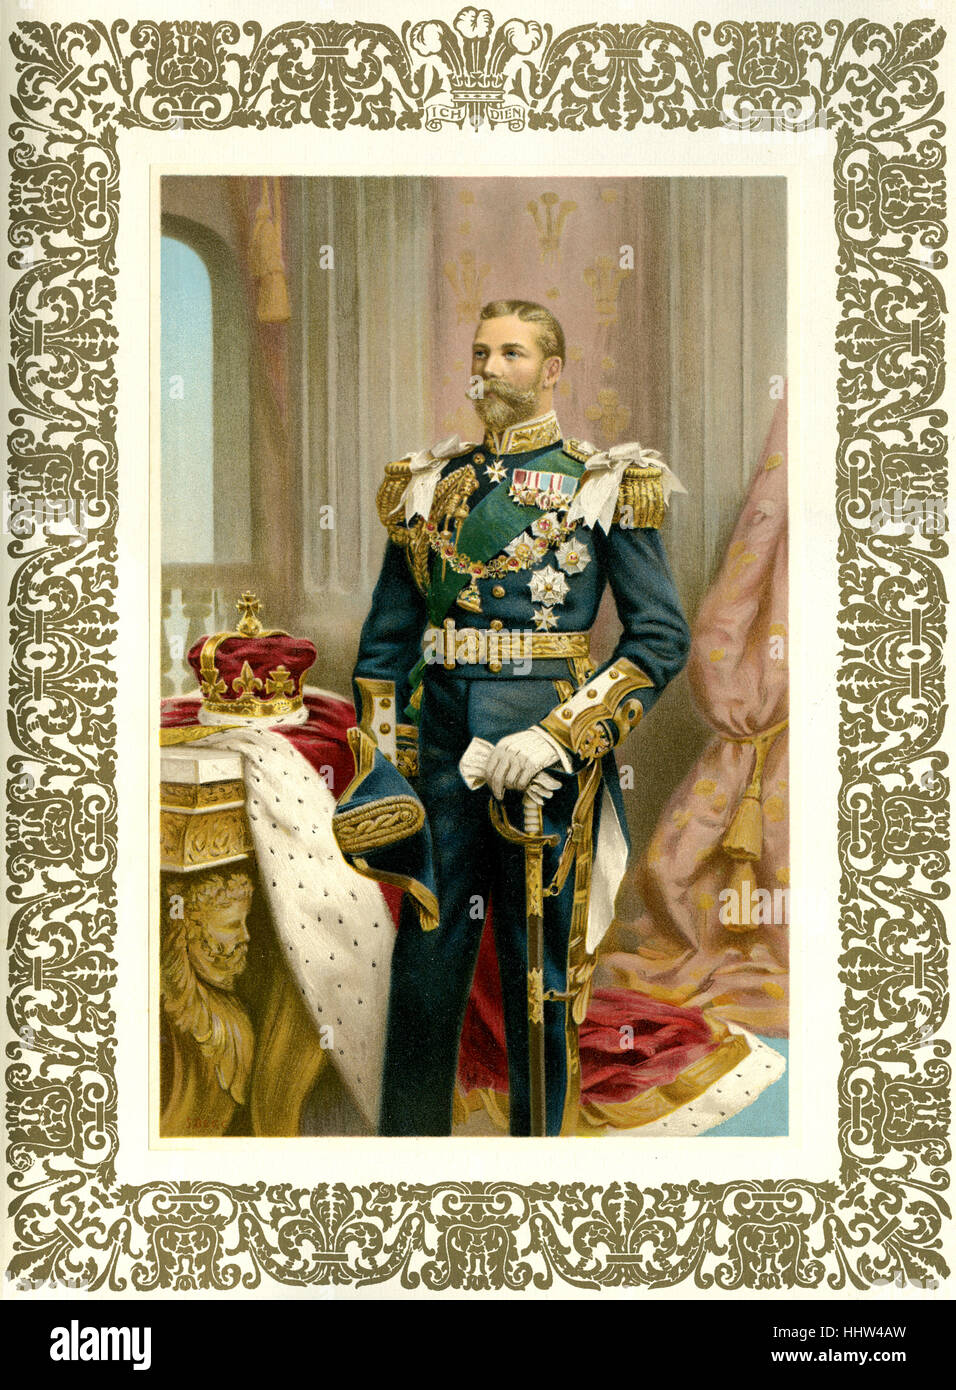 Future George V, King of England, as Prince of Wales in 1902. (1865 - 1936, crowned 1911). Stock Photo